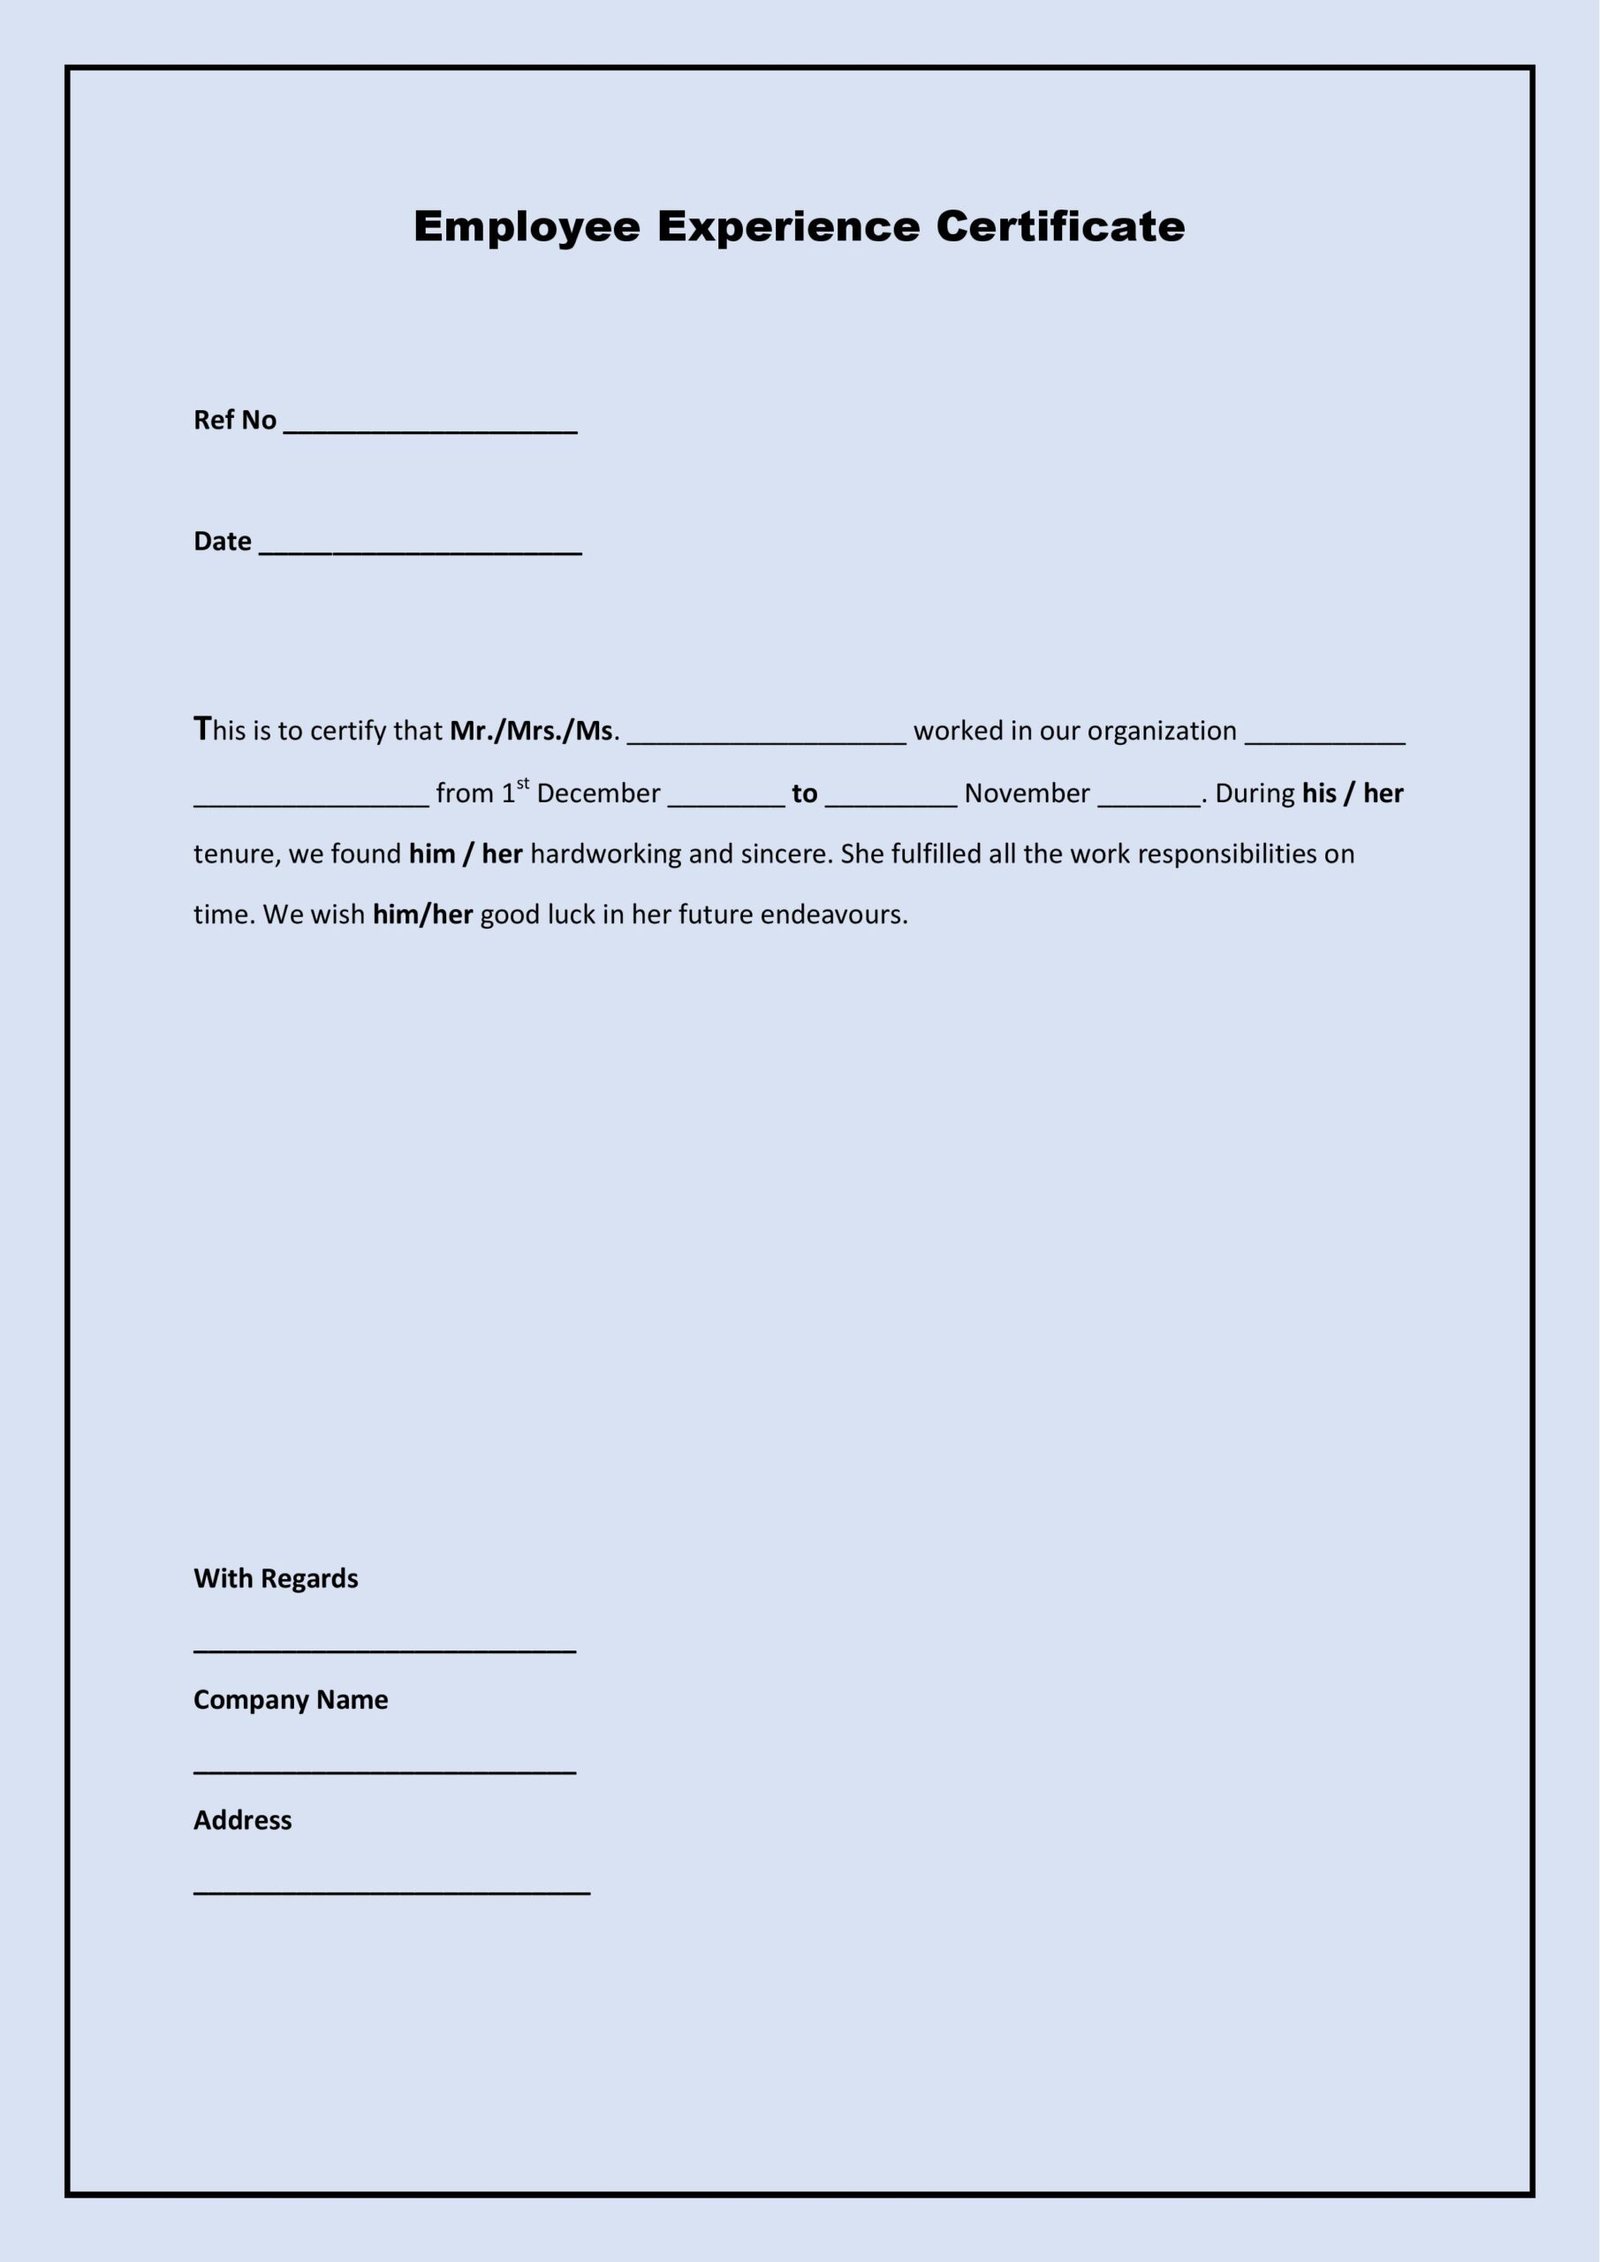 Relieving and experience letter format in word free download